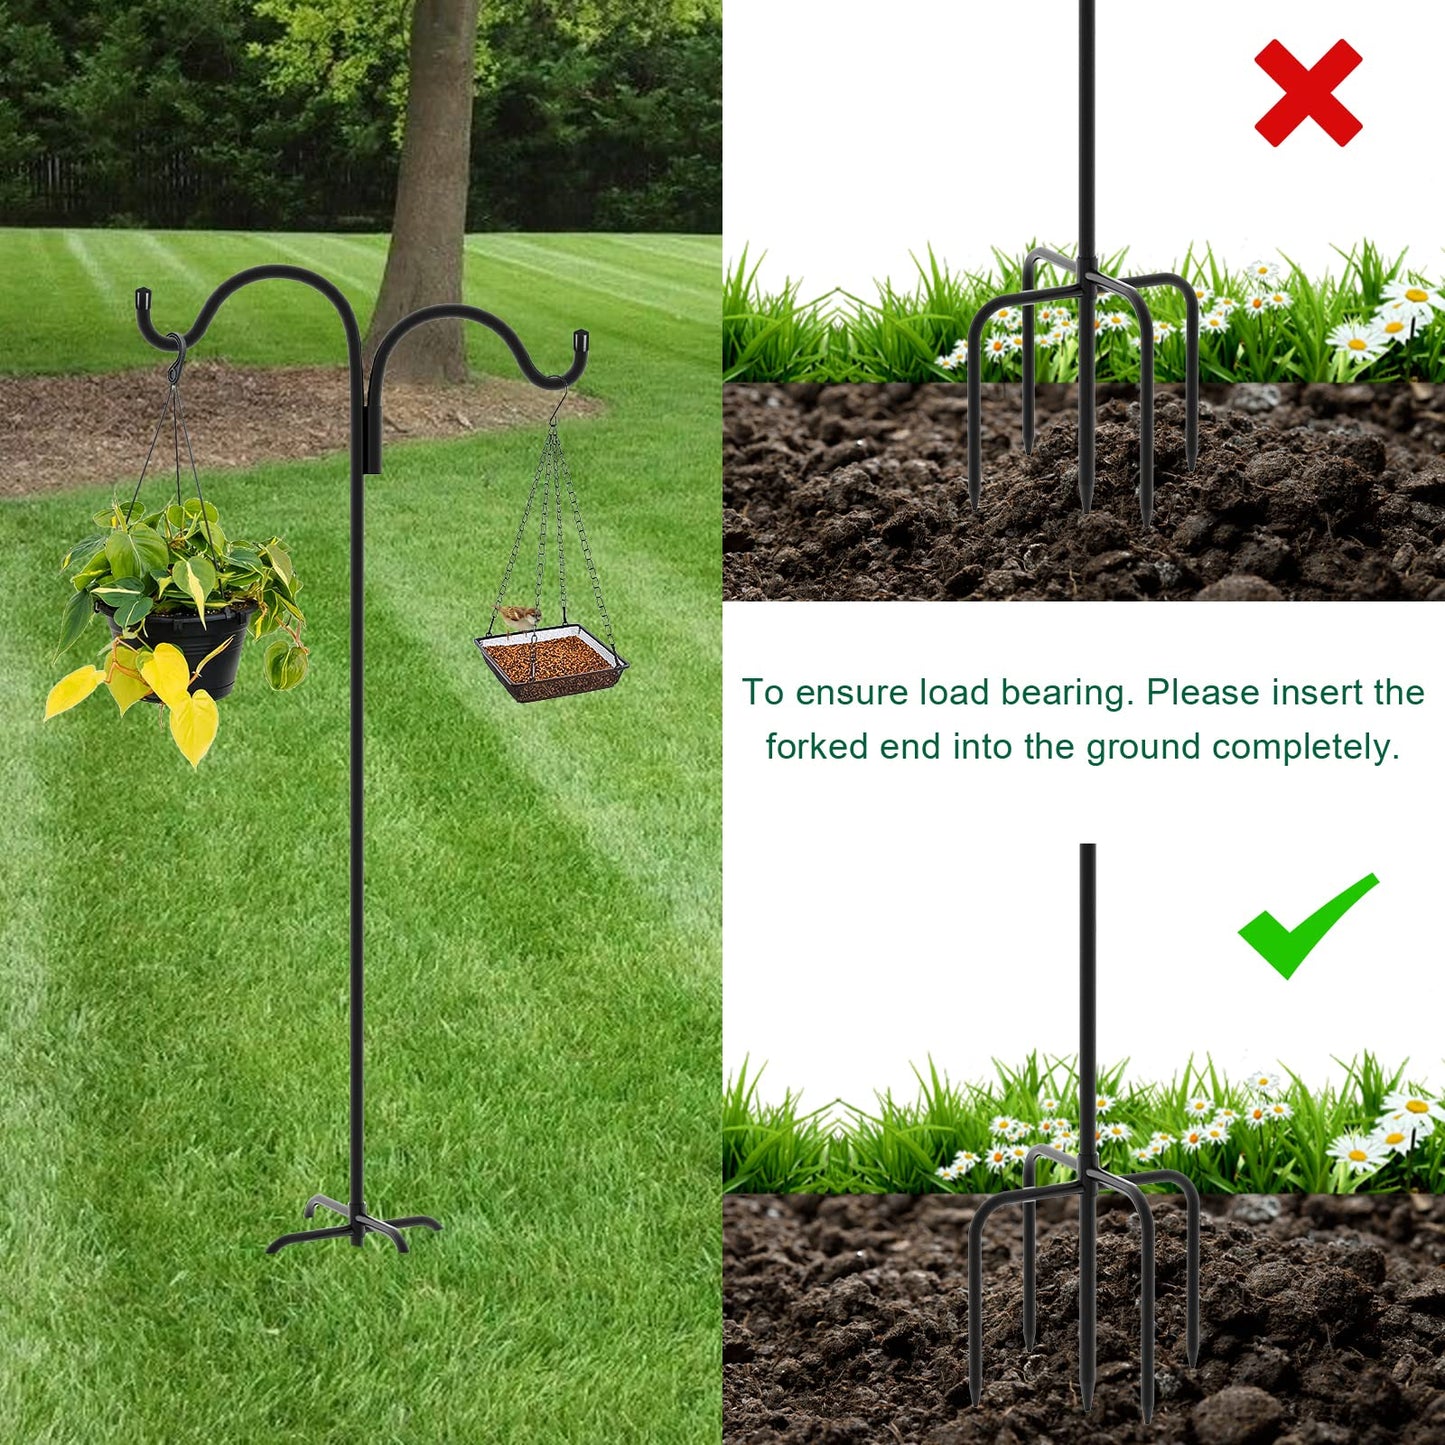 Gtongoko Double Shepherds Hook for Outdoor, 92 Inch Bird Feeder Pole with 5 Prongs Base, 5/8 Inch Thick Heavy Duty Adjustable Garden Hook for Hanging Plant, Lantern, Hummingbird Feeder, 1 Pack